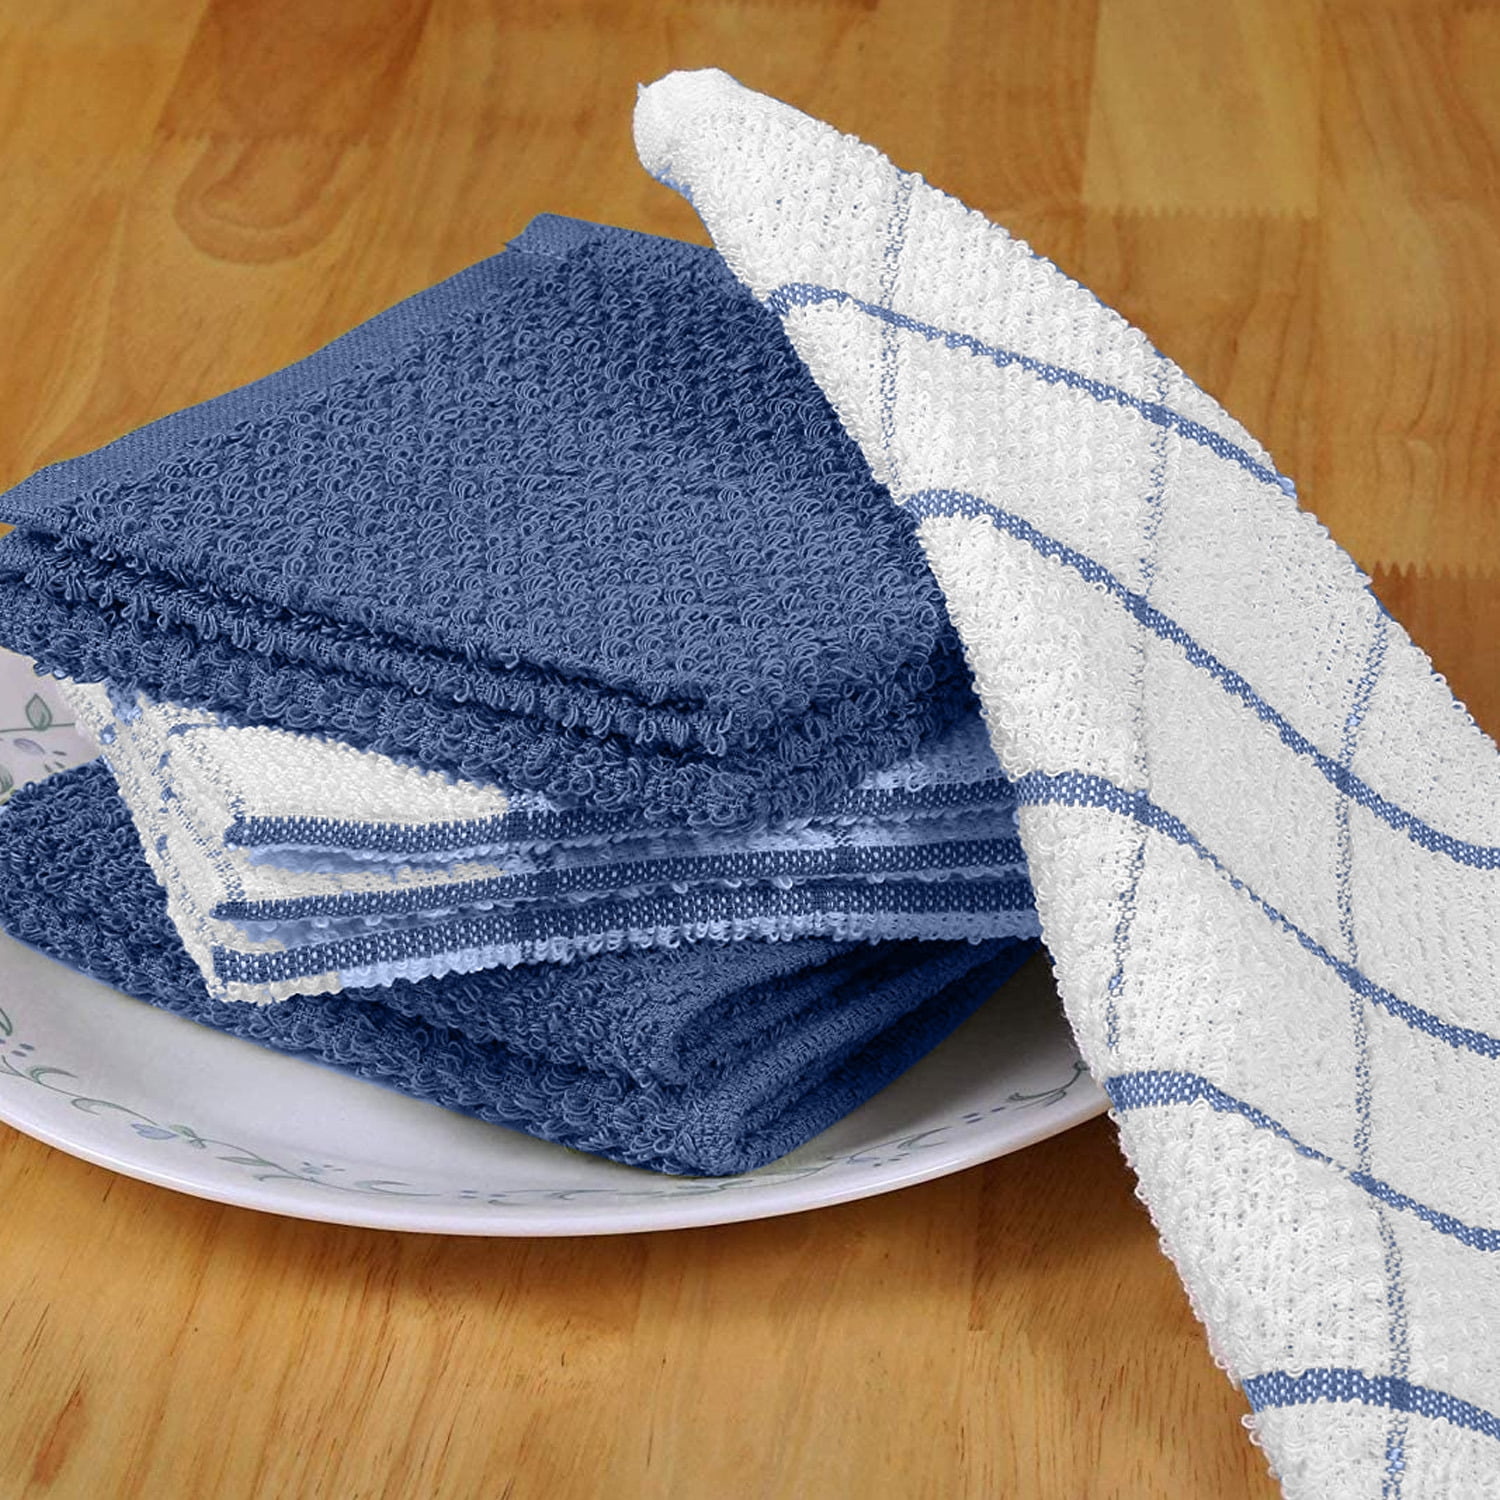 DecorRack 8 Pack Kitchen Dish Towels, 100% Cotton, 12 x 12 Inch Dish Cloths,  Turquoise (Pack of 8) 